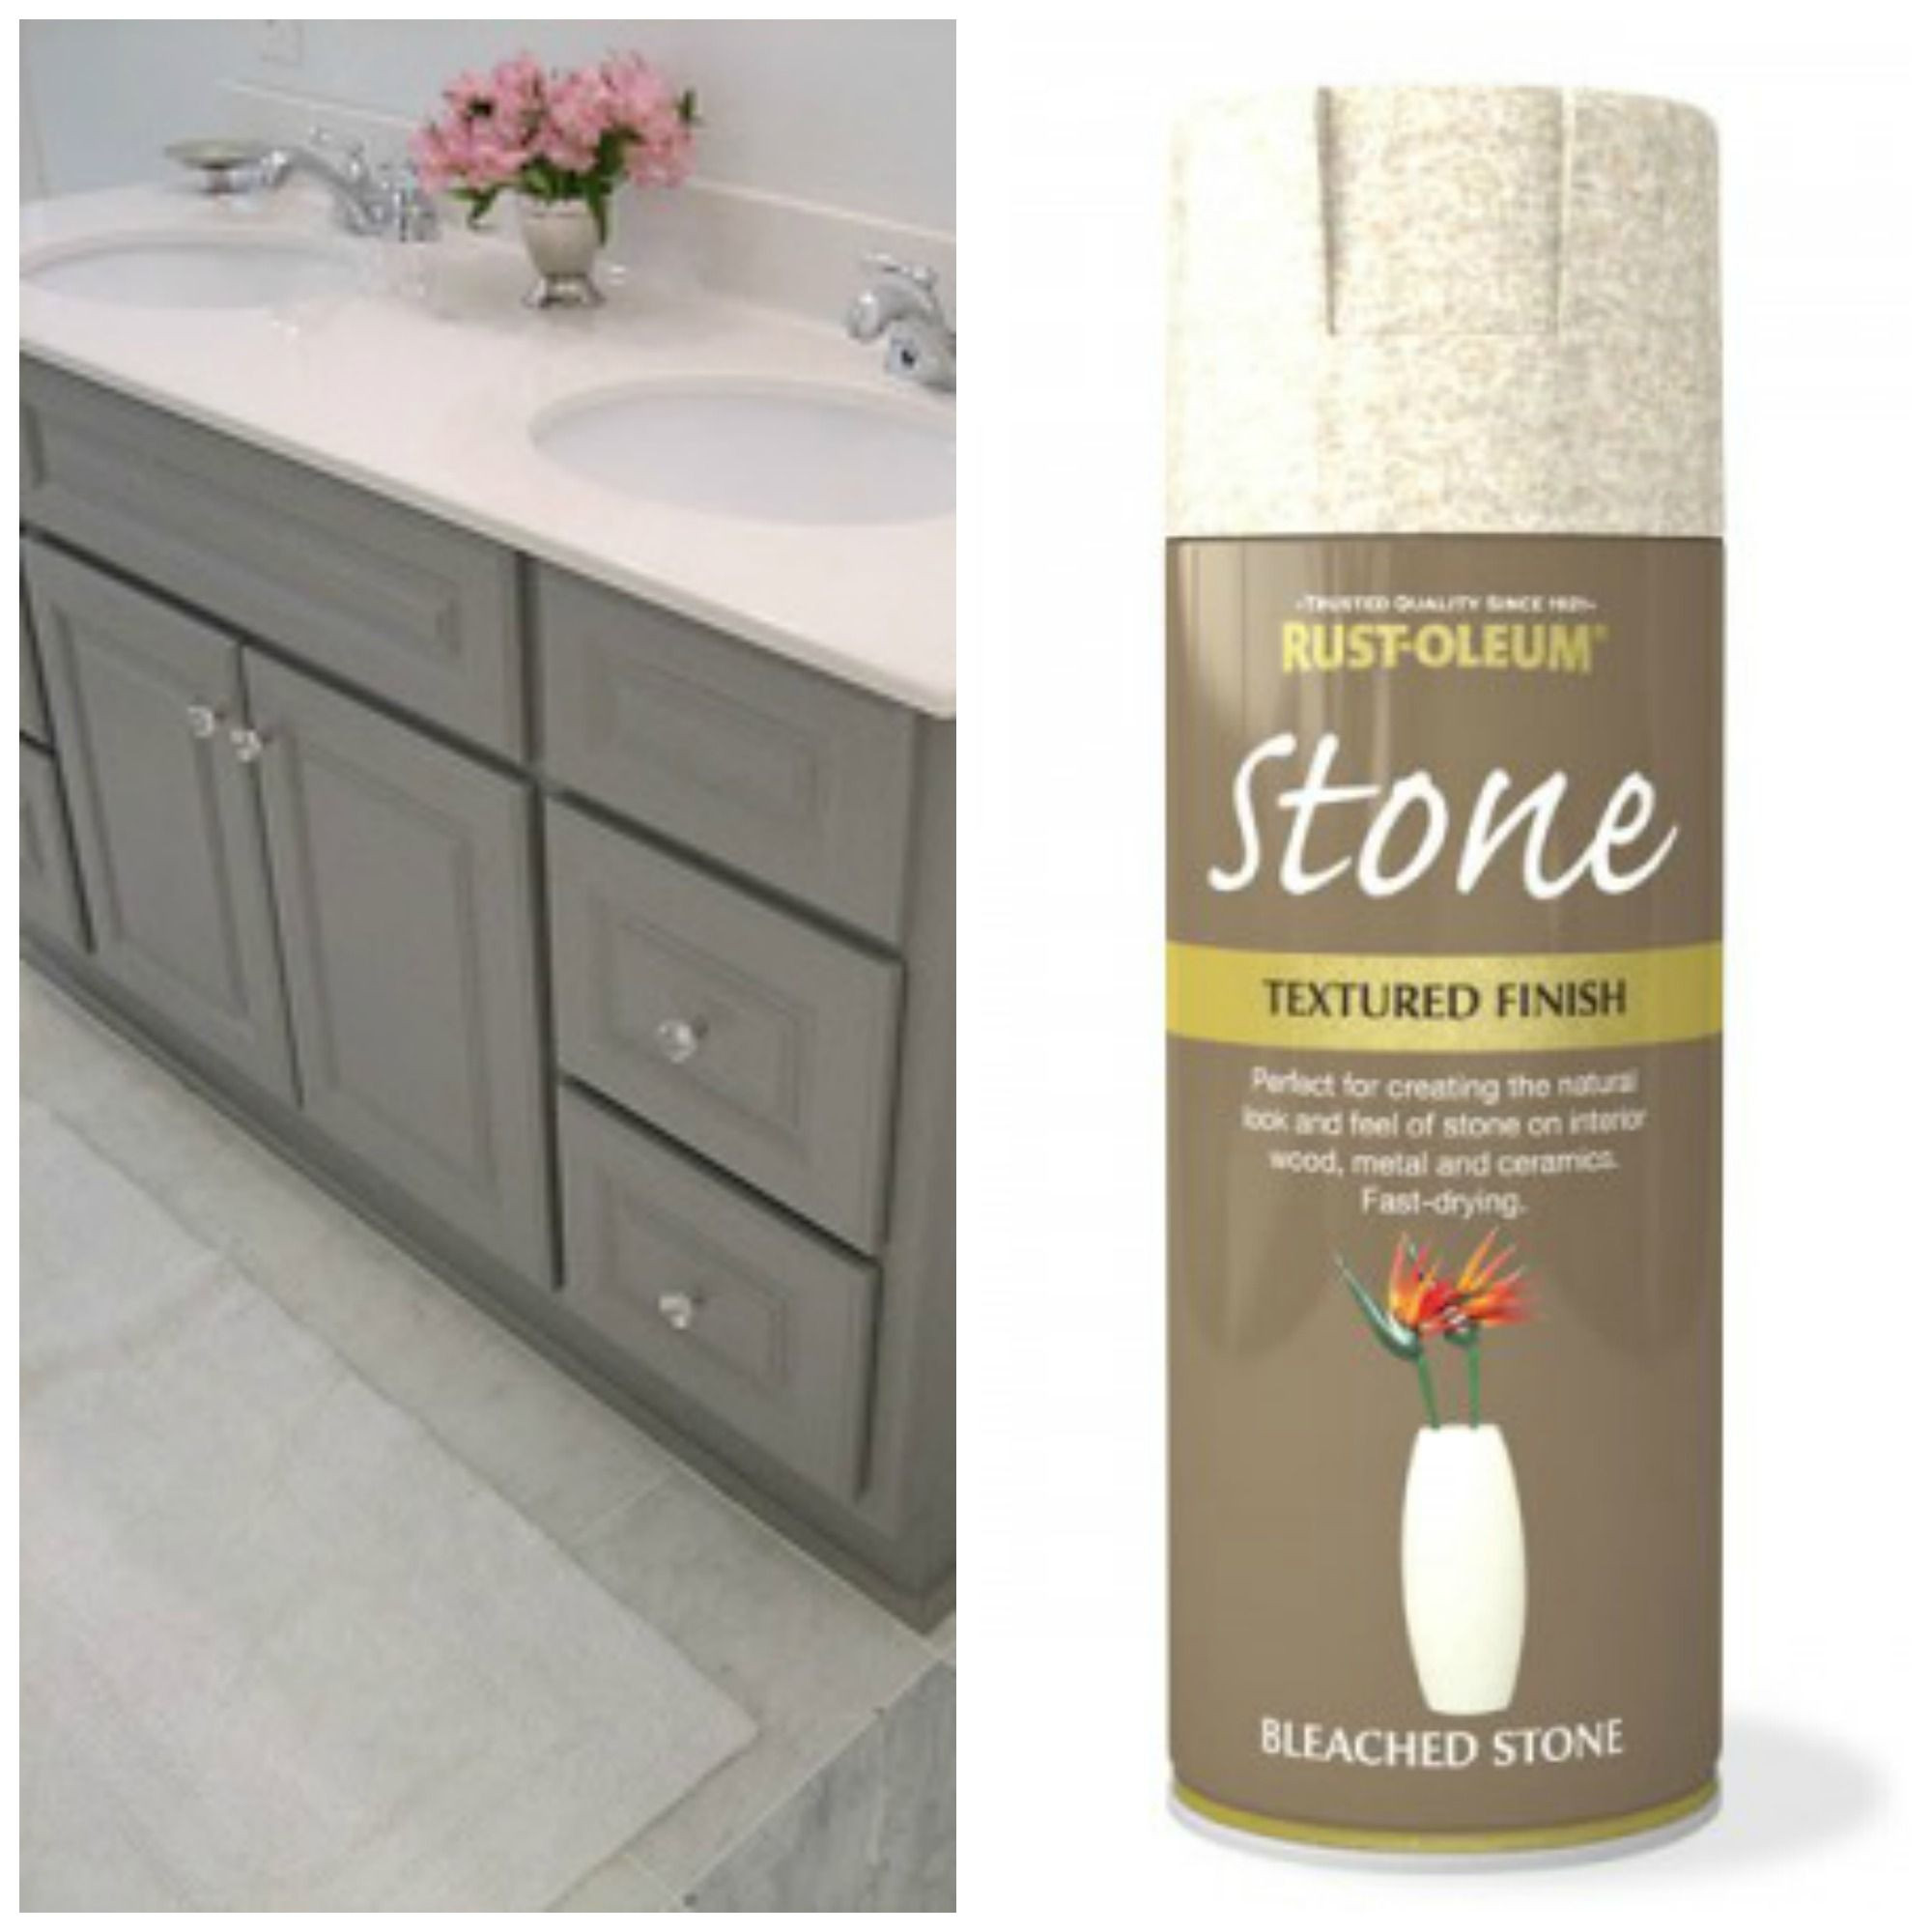 Spray Paint Bathroom Countertop
 Grey cabinet with stone colored spray paint for counter